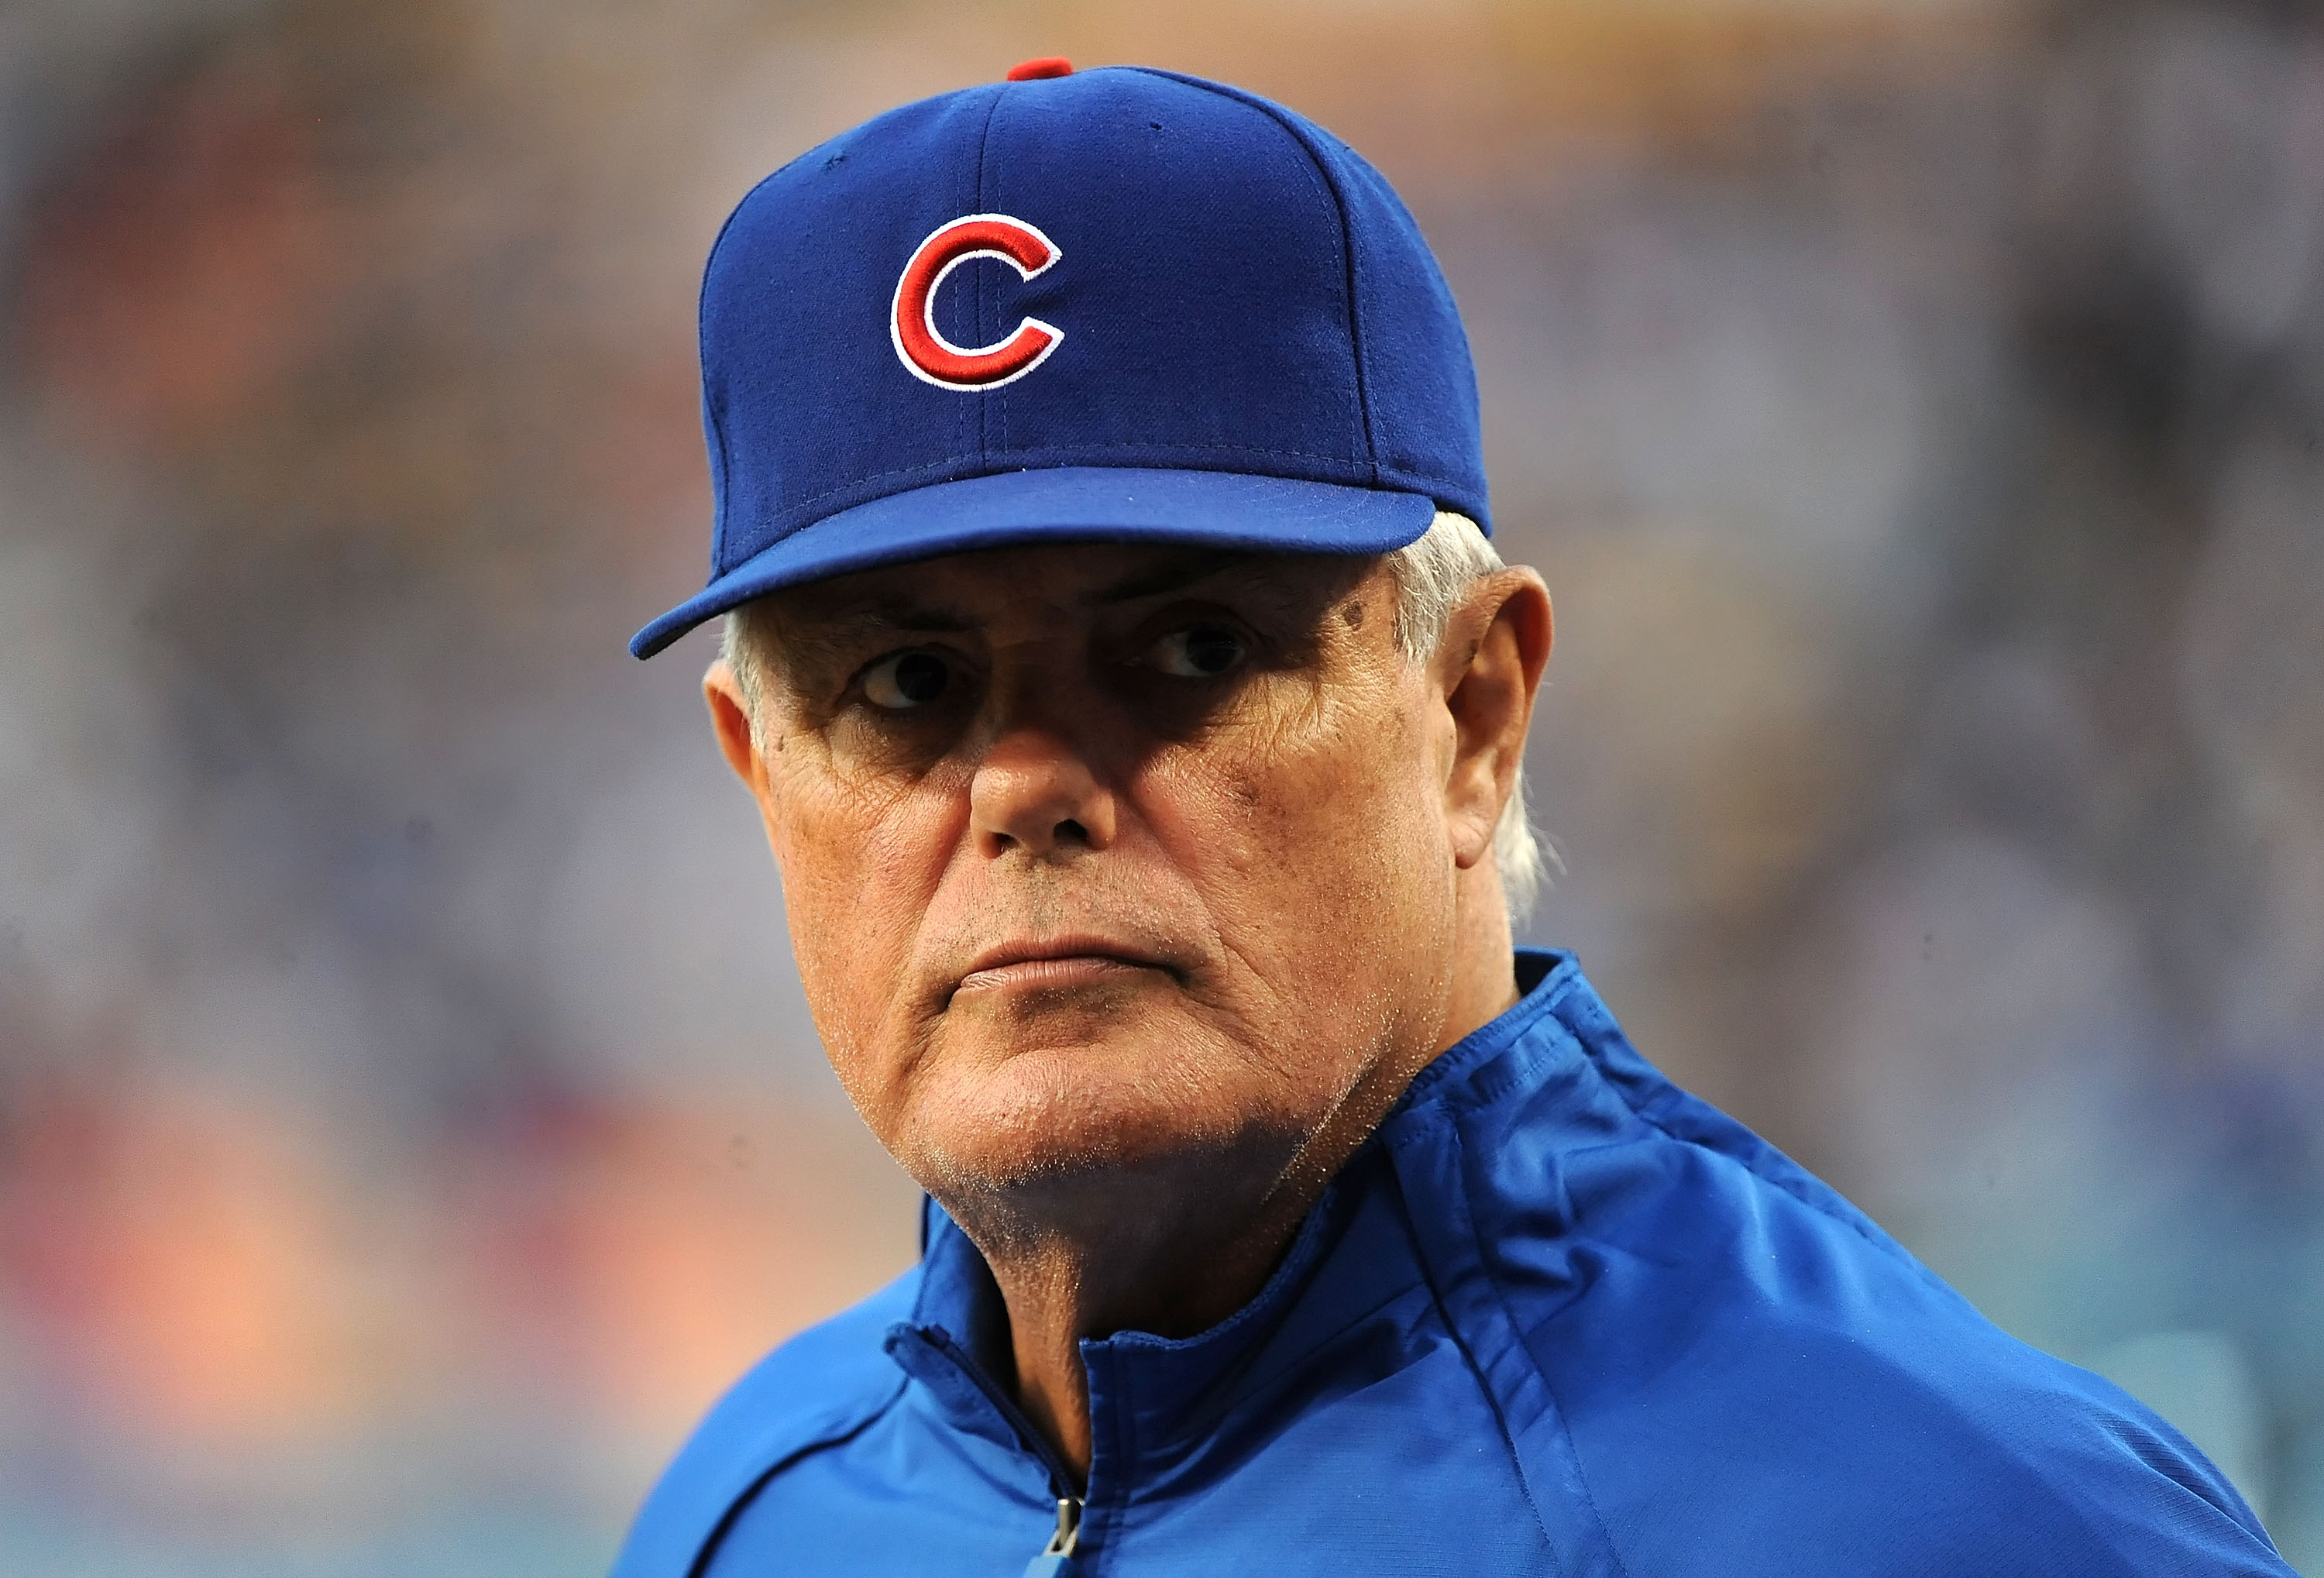 Former Cubs manager Lou Piniella named as Hall of Fame finalist